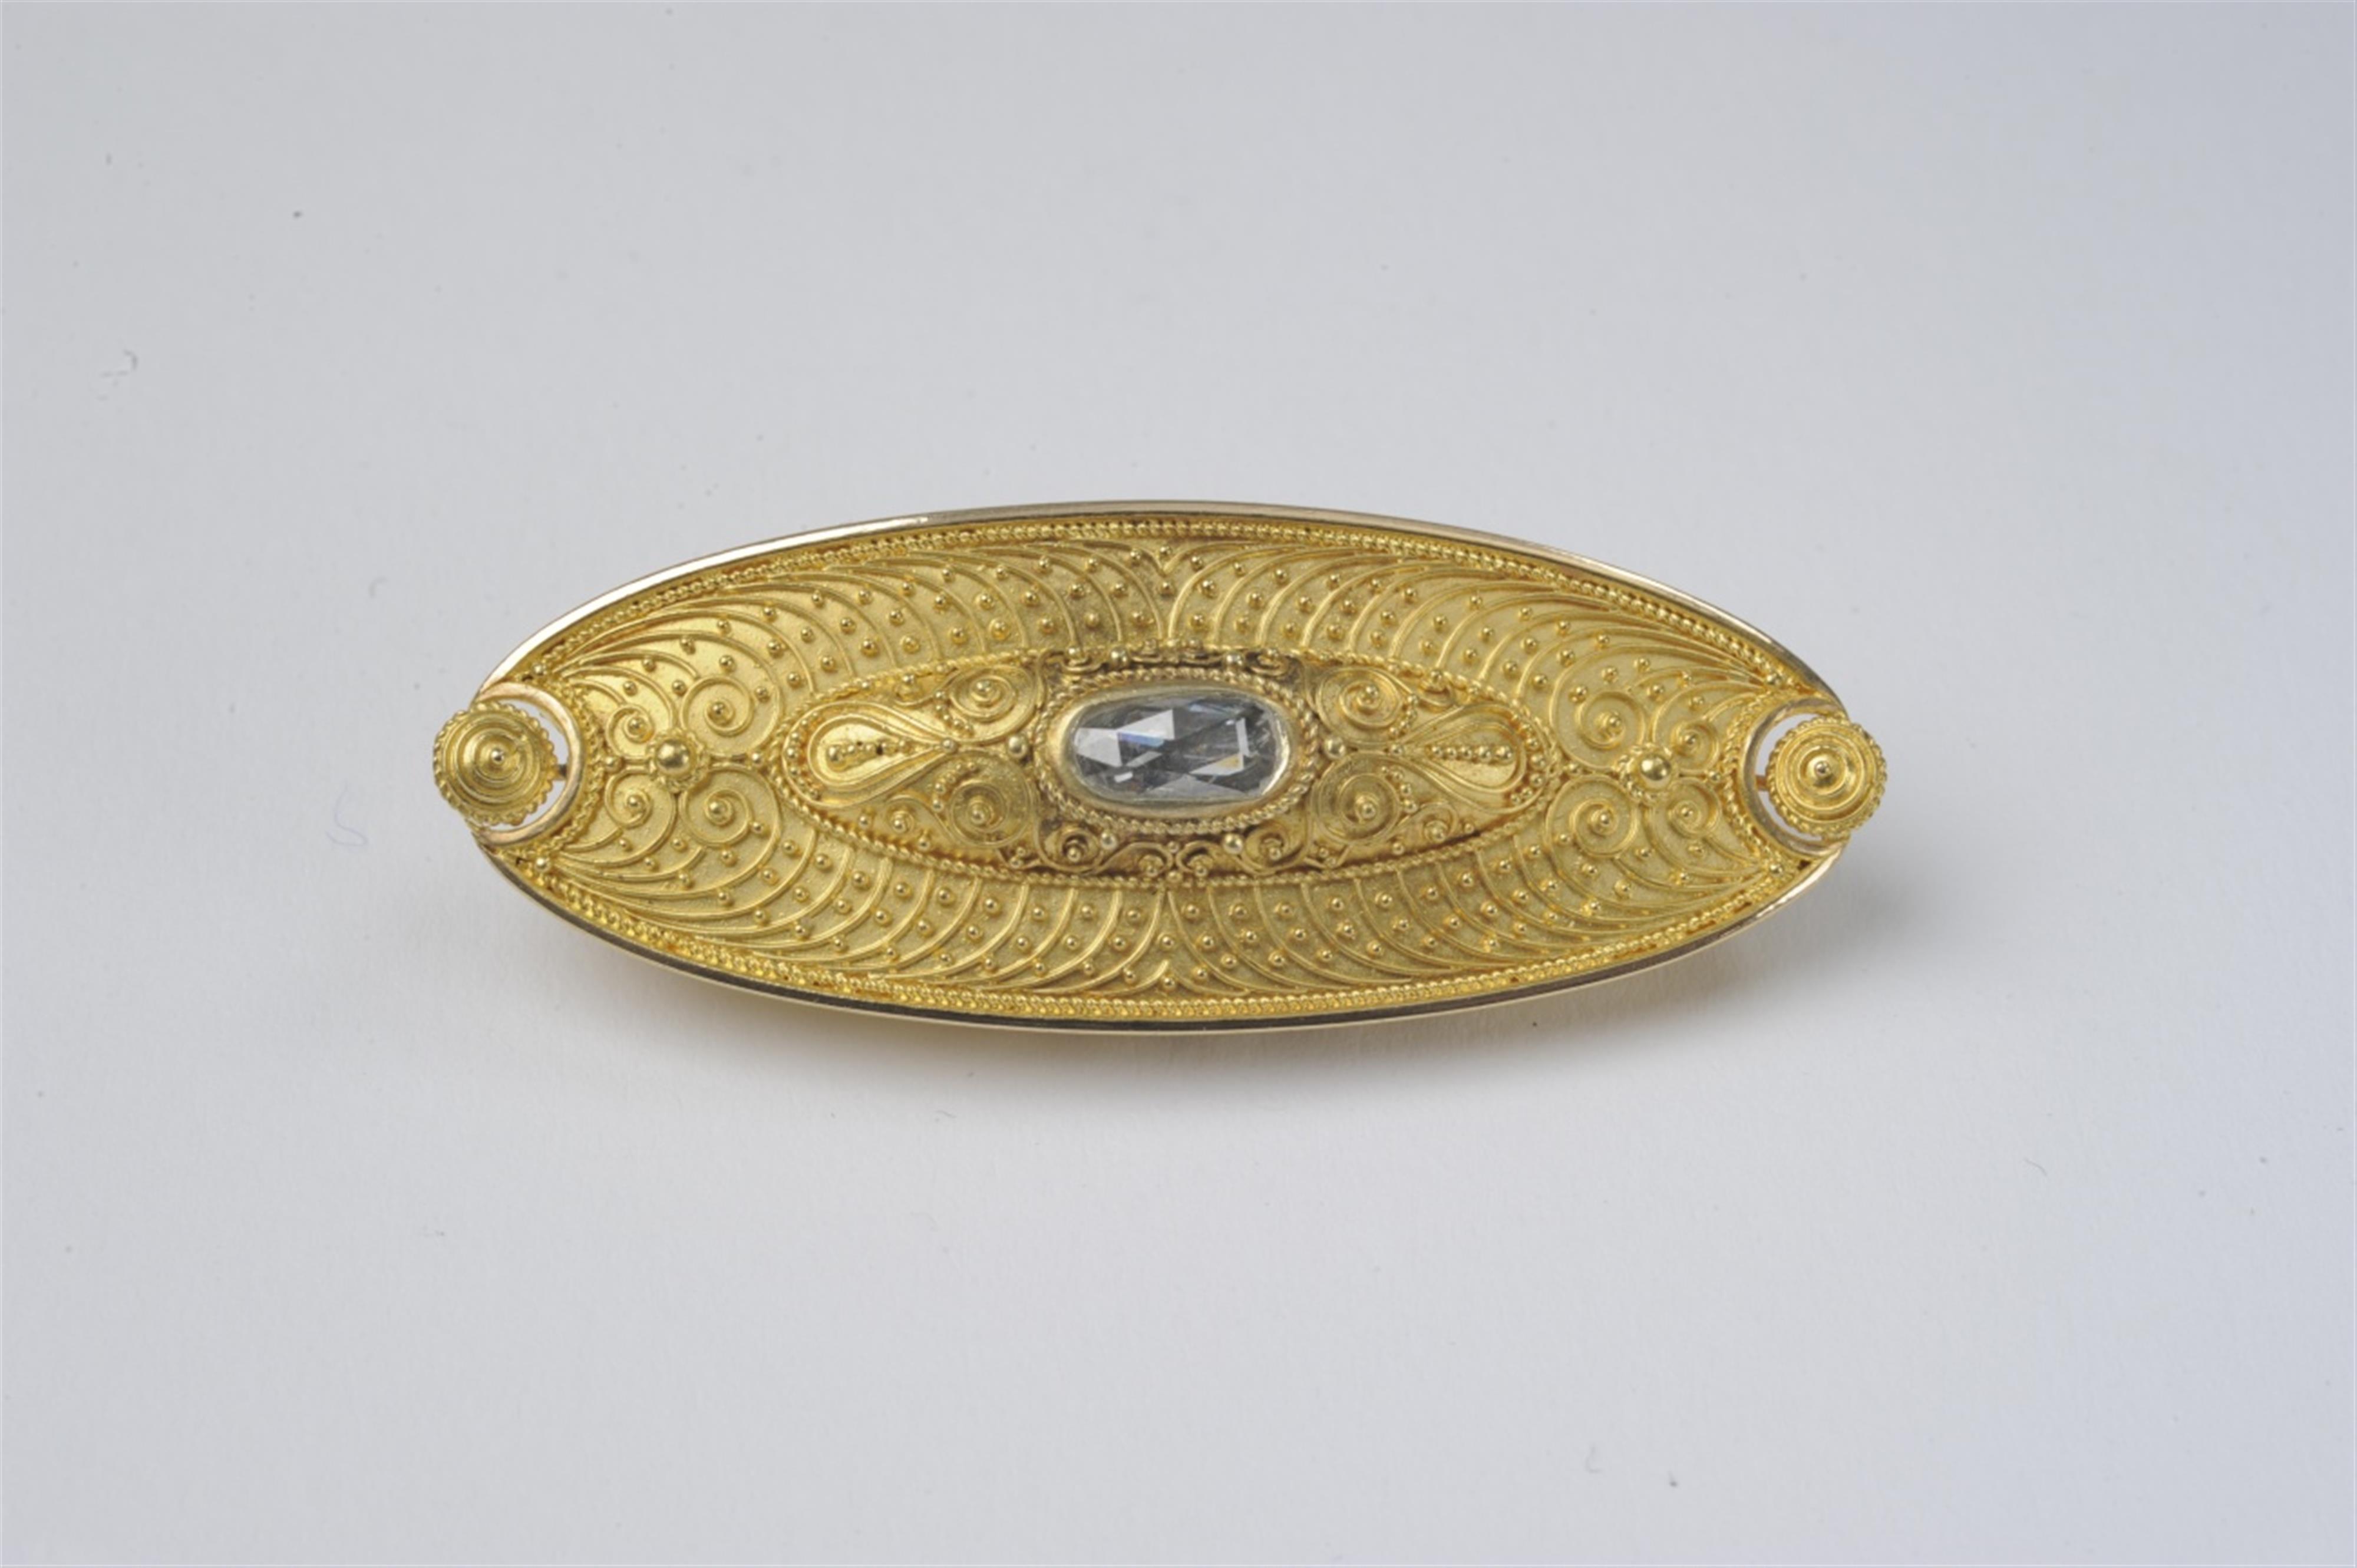 A Viennese 14k gold brooch with granulated decor - image-1